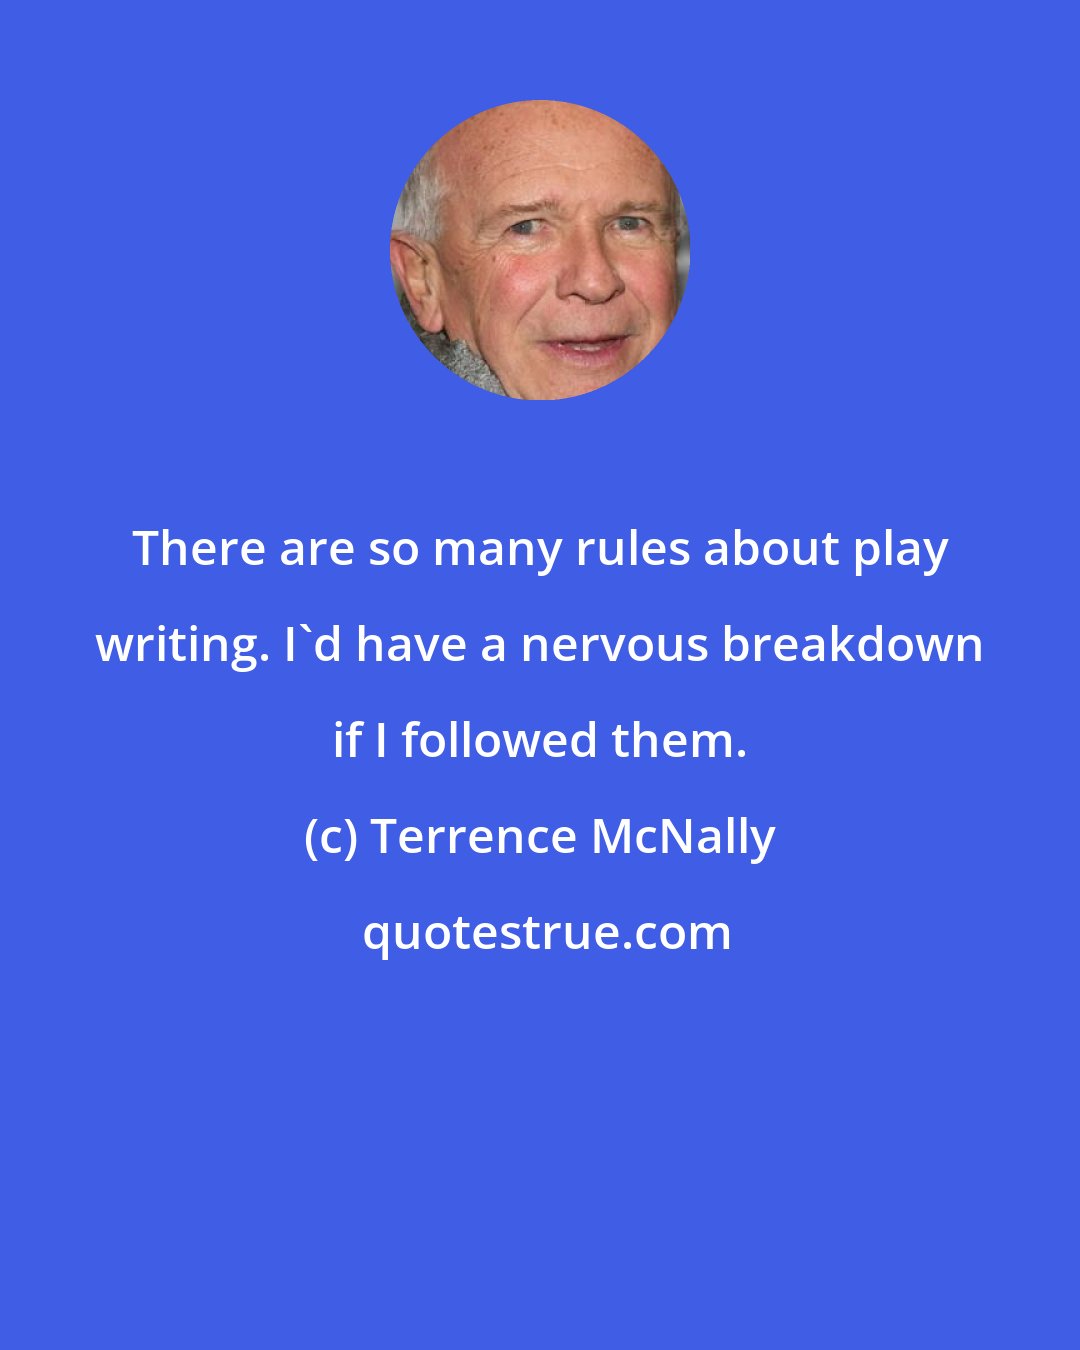 Terrence McNally: There are so many rules about play writing. I'd have a nervous breakdown if I followed them.